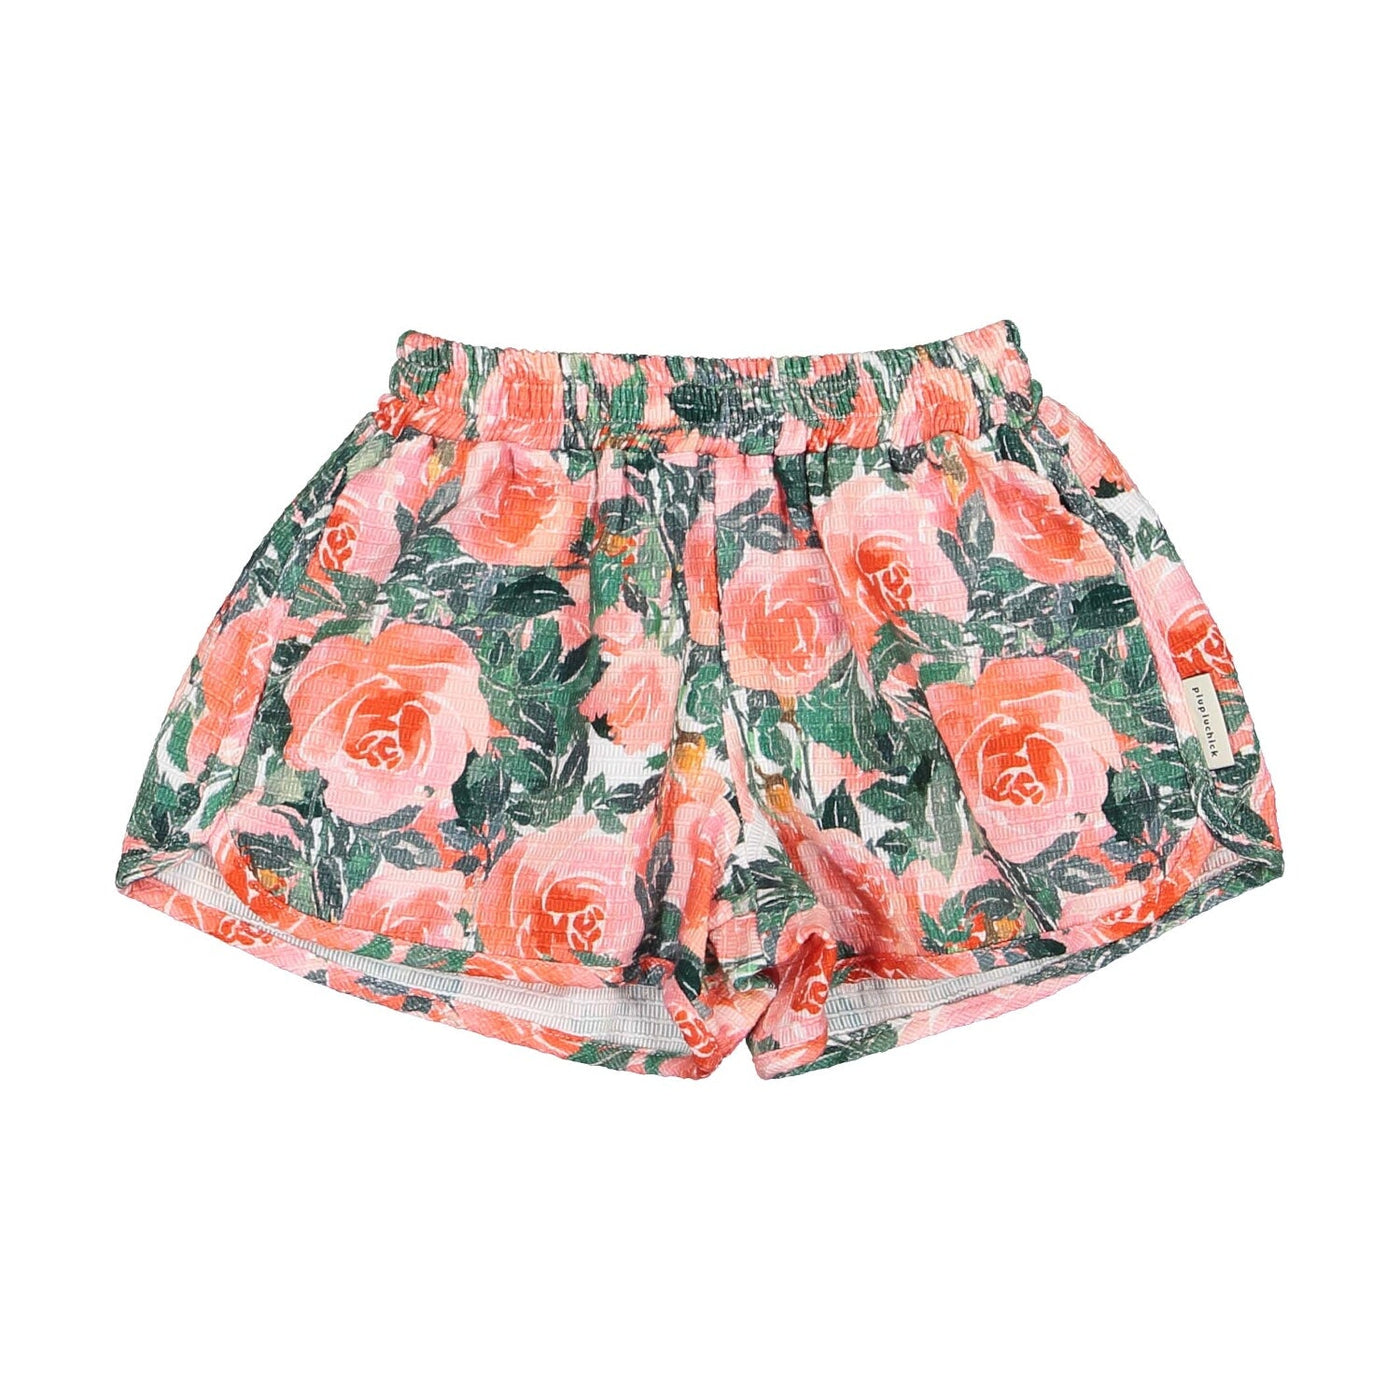 Big Flowers All Over Shorts by Piupiuchick - Petite Belle